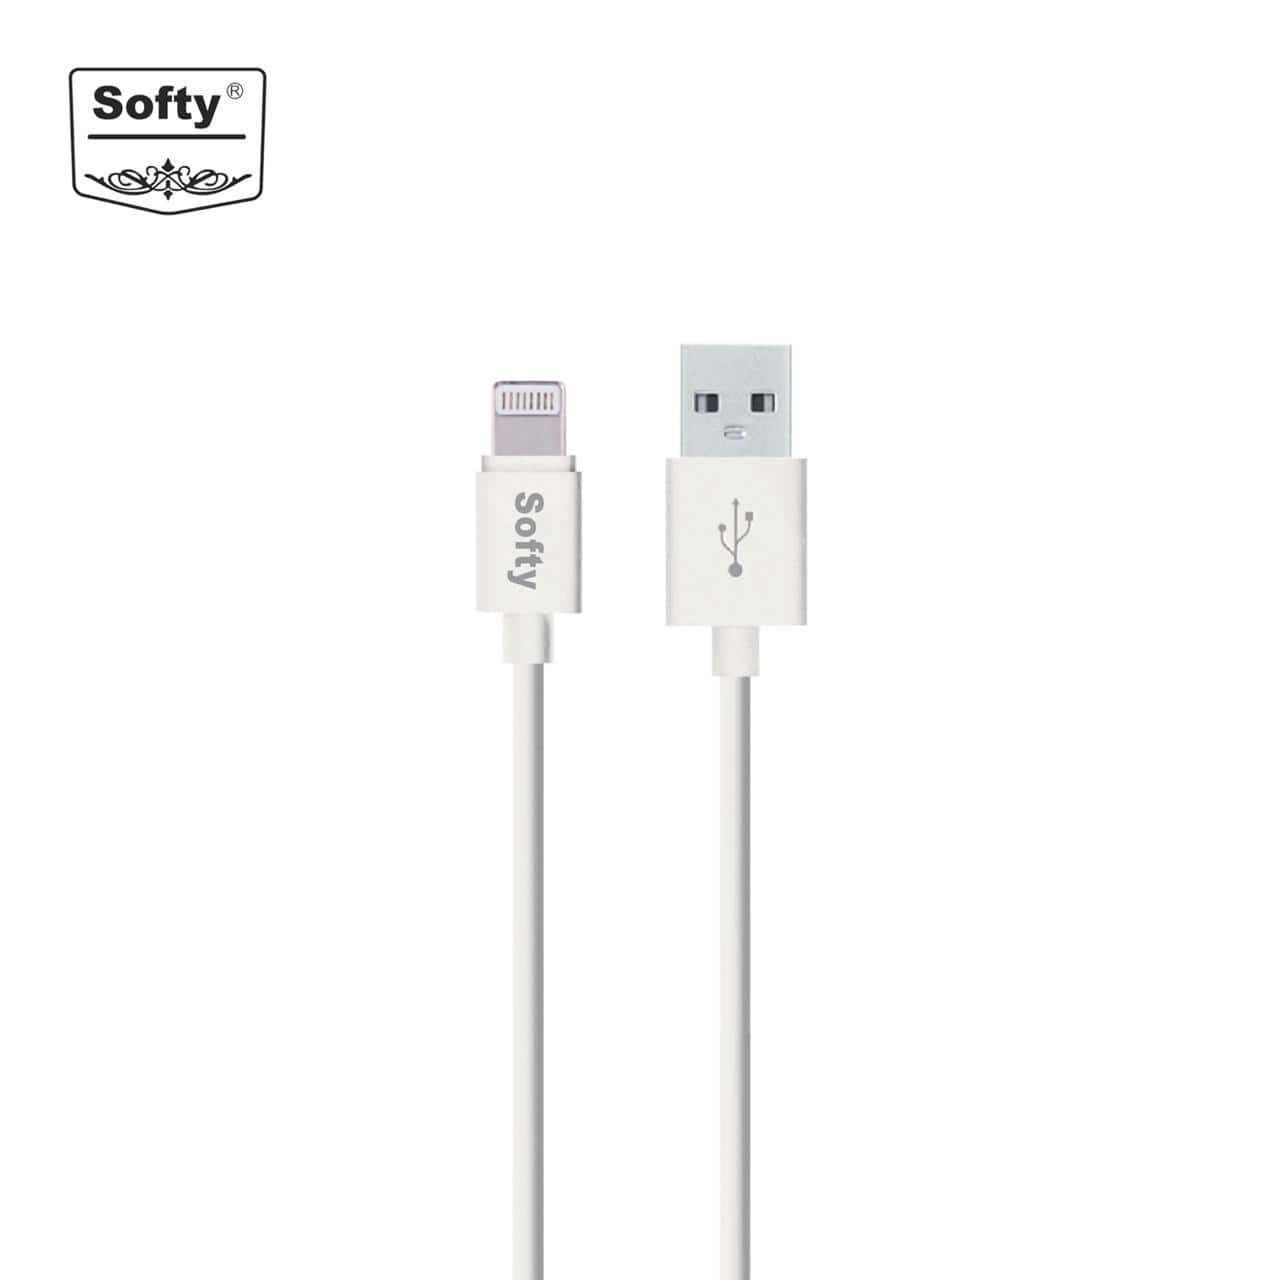 Softy premium quality for apple Lightning usb cable 1.5M-USB Cable-dealsplant